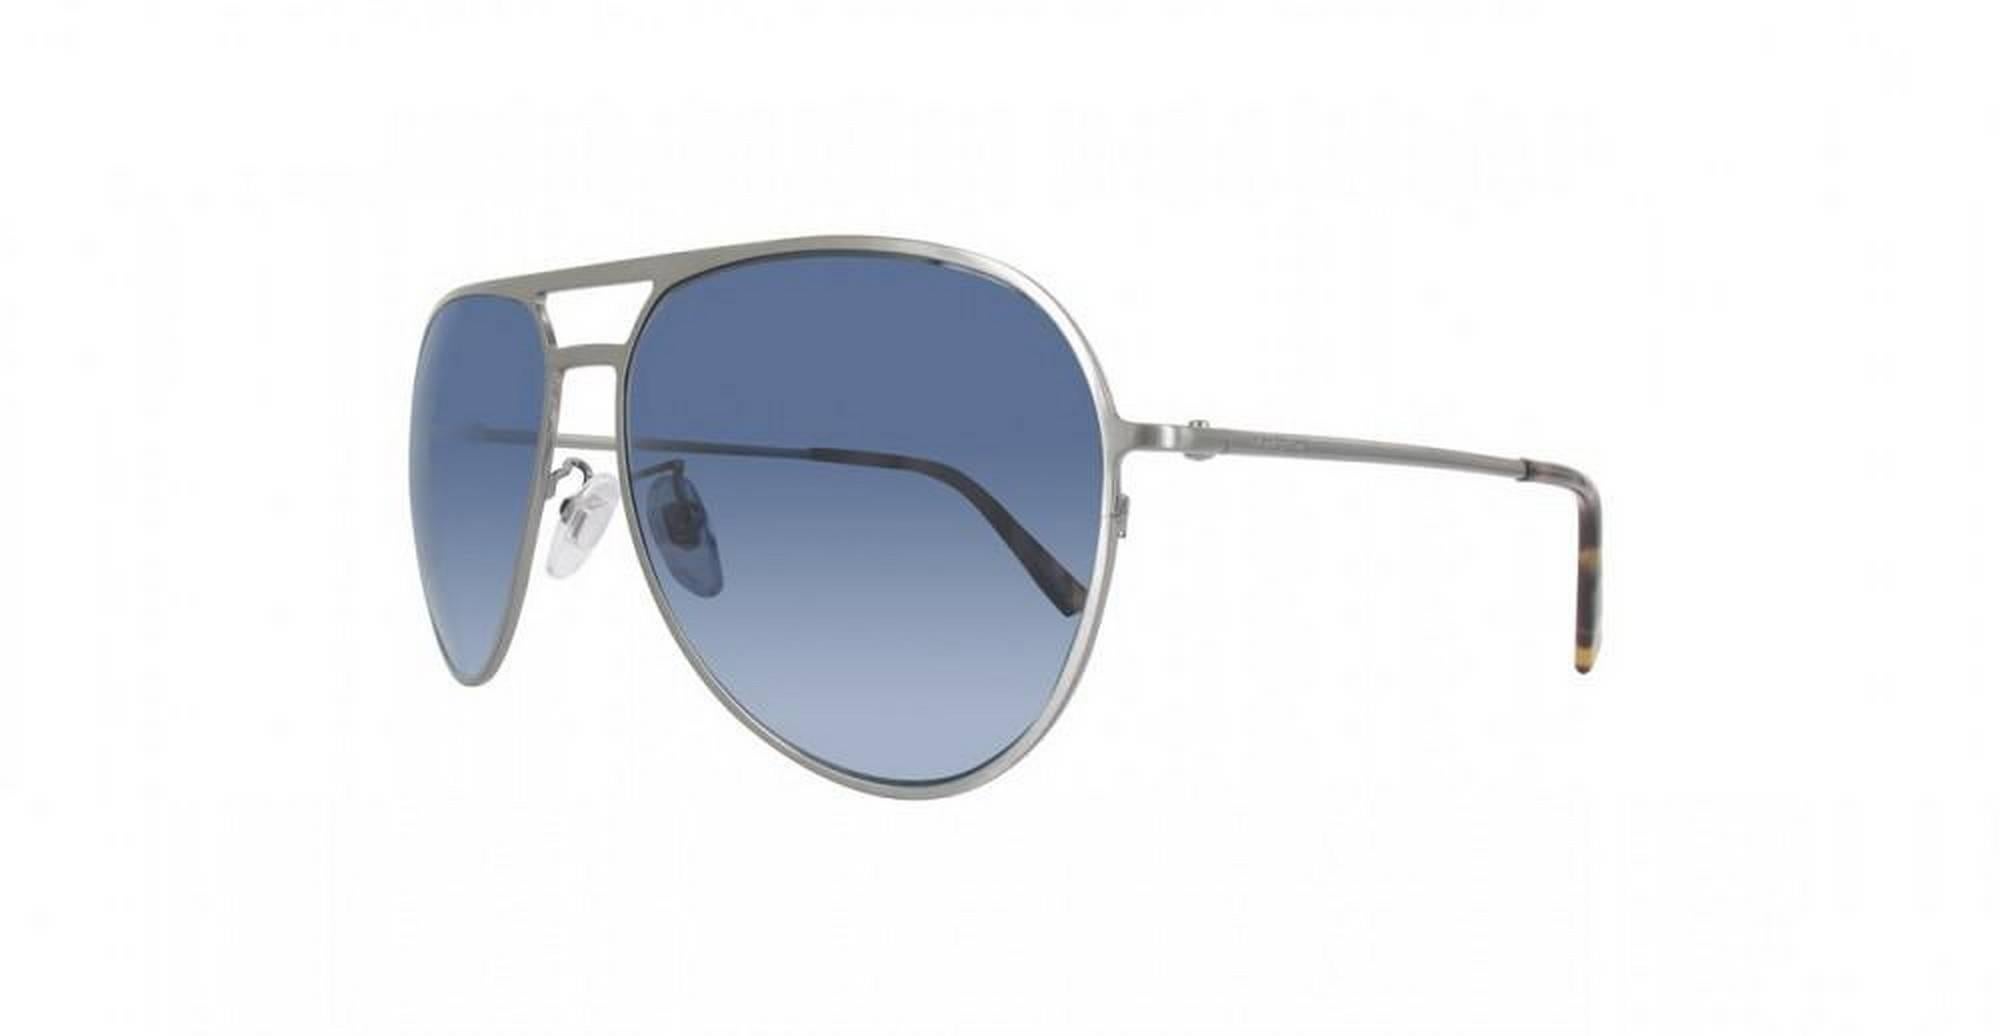 Montblanc MB546SF-14V-62 Metal Bright Sparkling Ruthenium - Blue Sunglasses
Brand: Montblanc
Style Code: MB546SF-14V-62
Frame: Metal
Color: Bright Sparkling Ruthenium - Blue
Brand new condition. 
Original case and cloth included. 
Made in Italy.